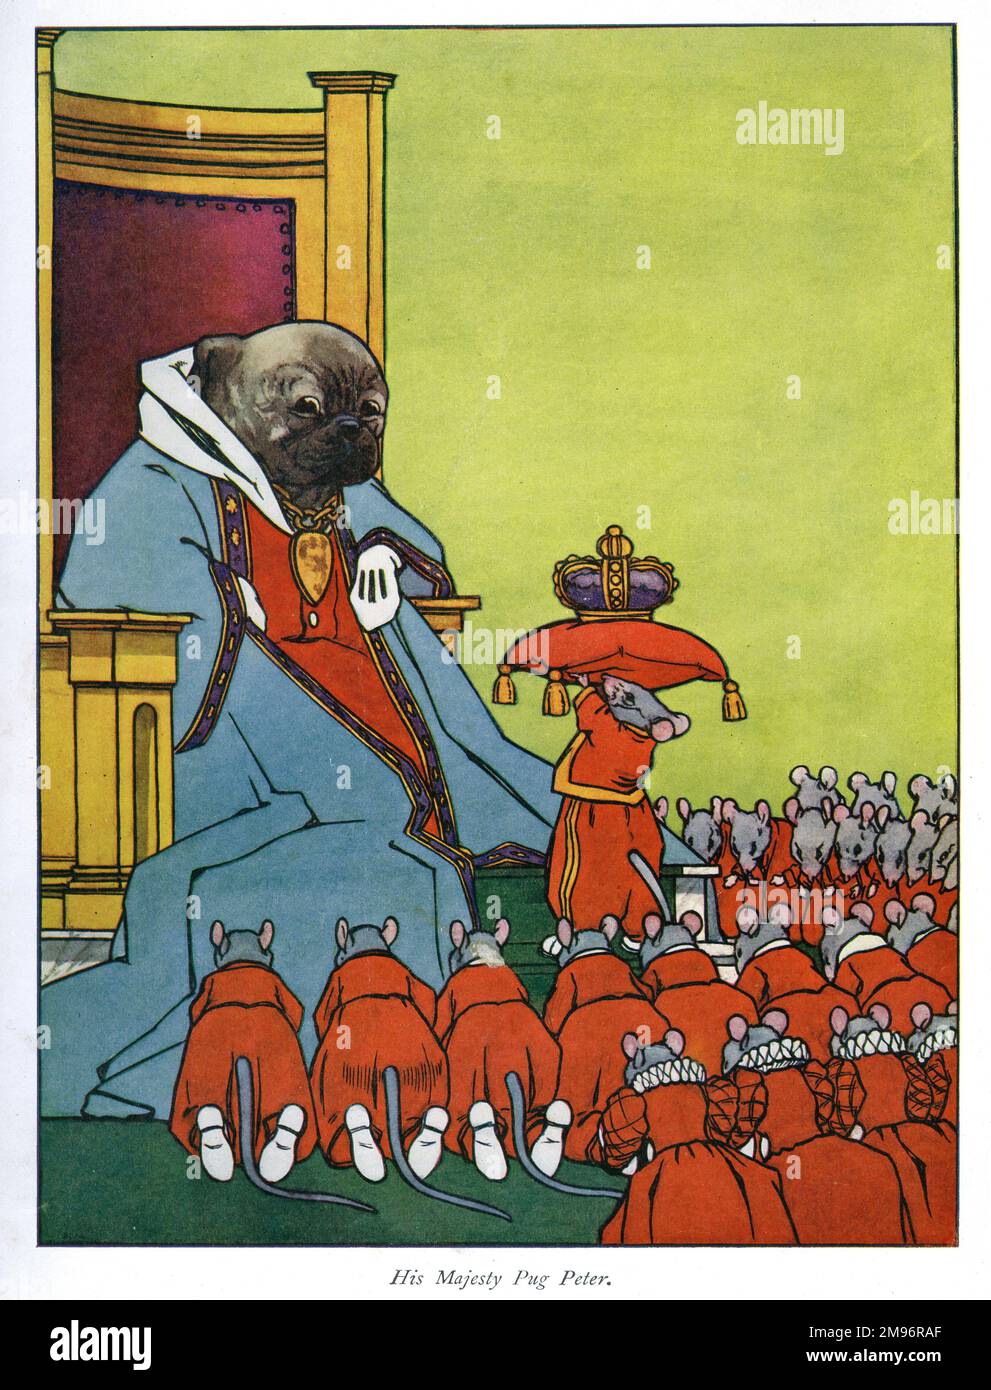 Pug Peter -- His Majesty Pug Peter.  Seen here seated on a throne with his mouse subjects kneeling in reverence.  One mouse holds up a crown on a red cushion. Stock Photo